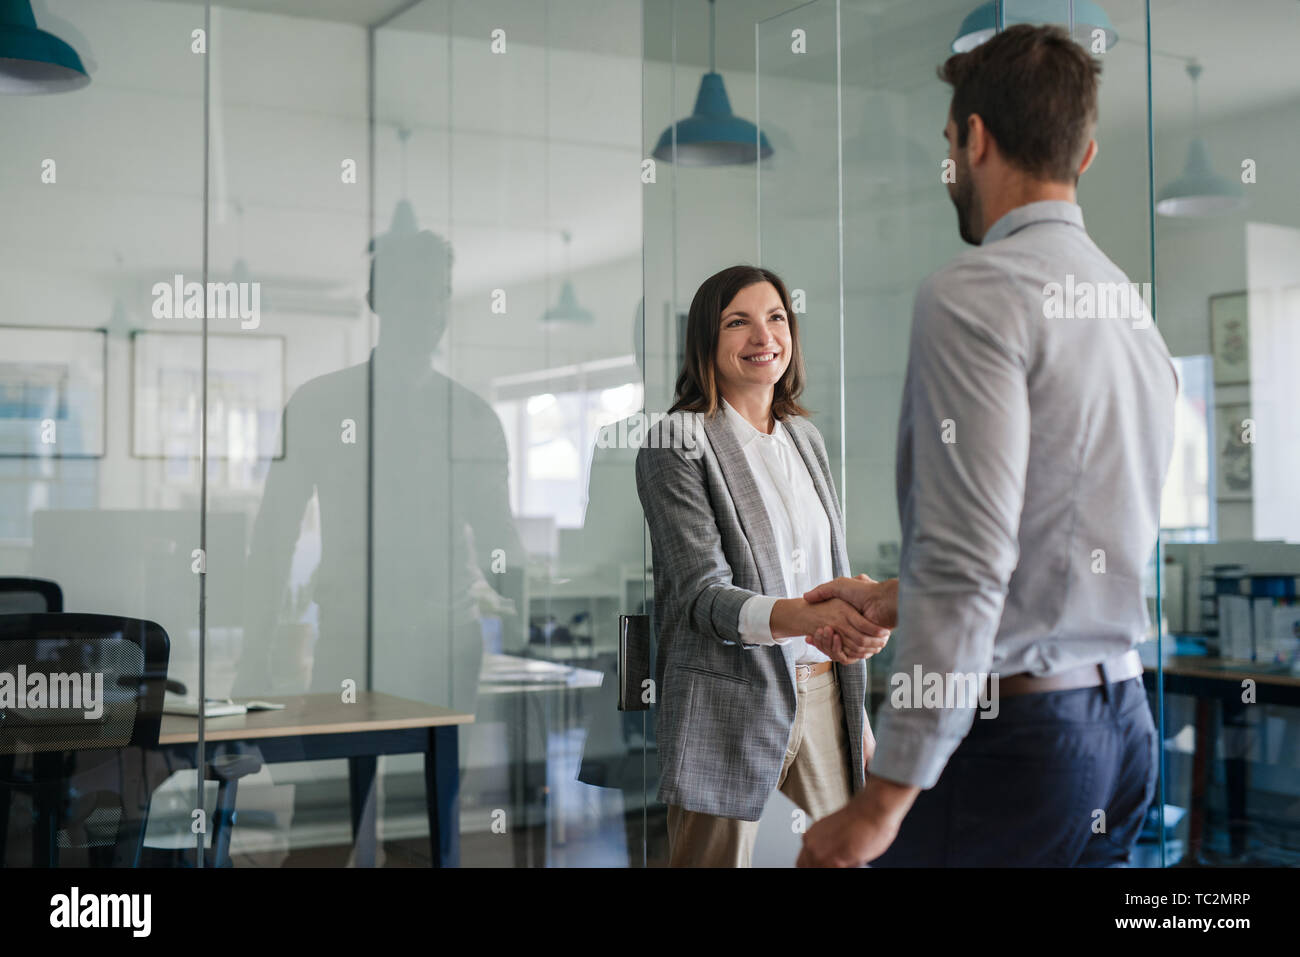 Manager smiling while welcoming a new office employee Stock Photo